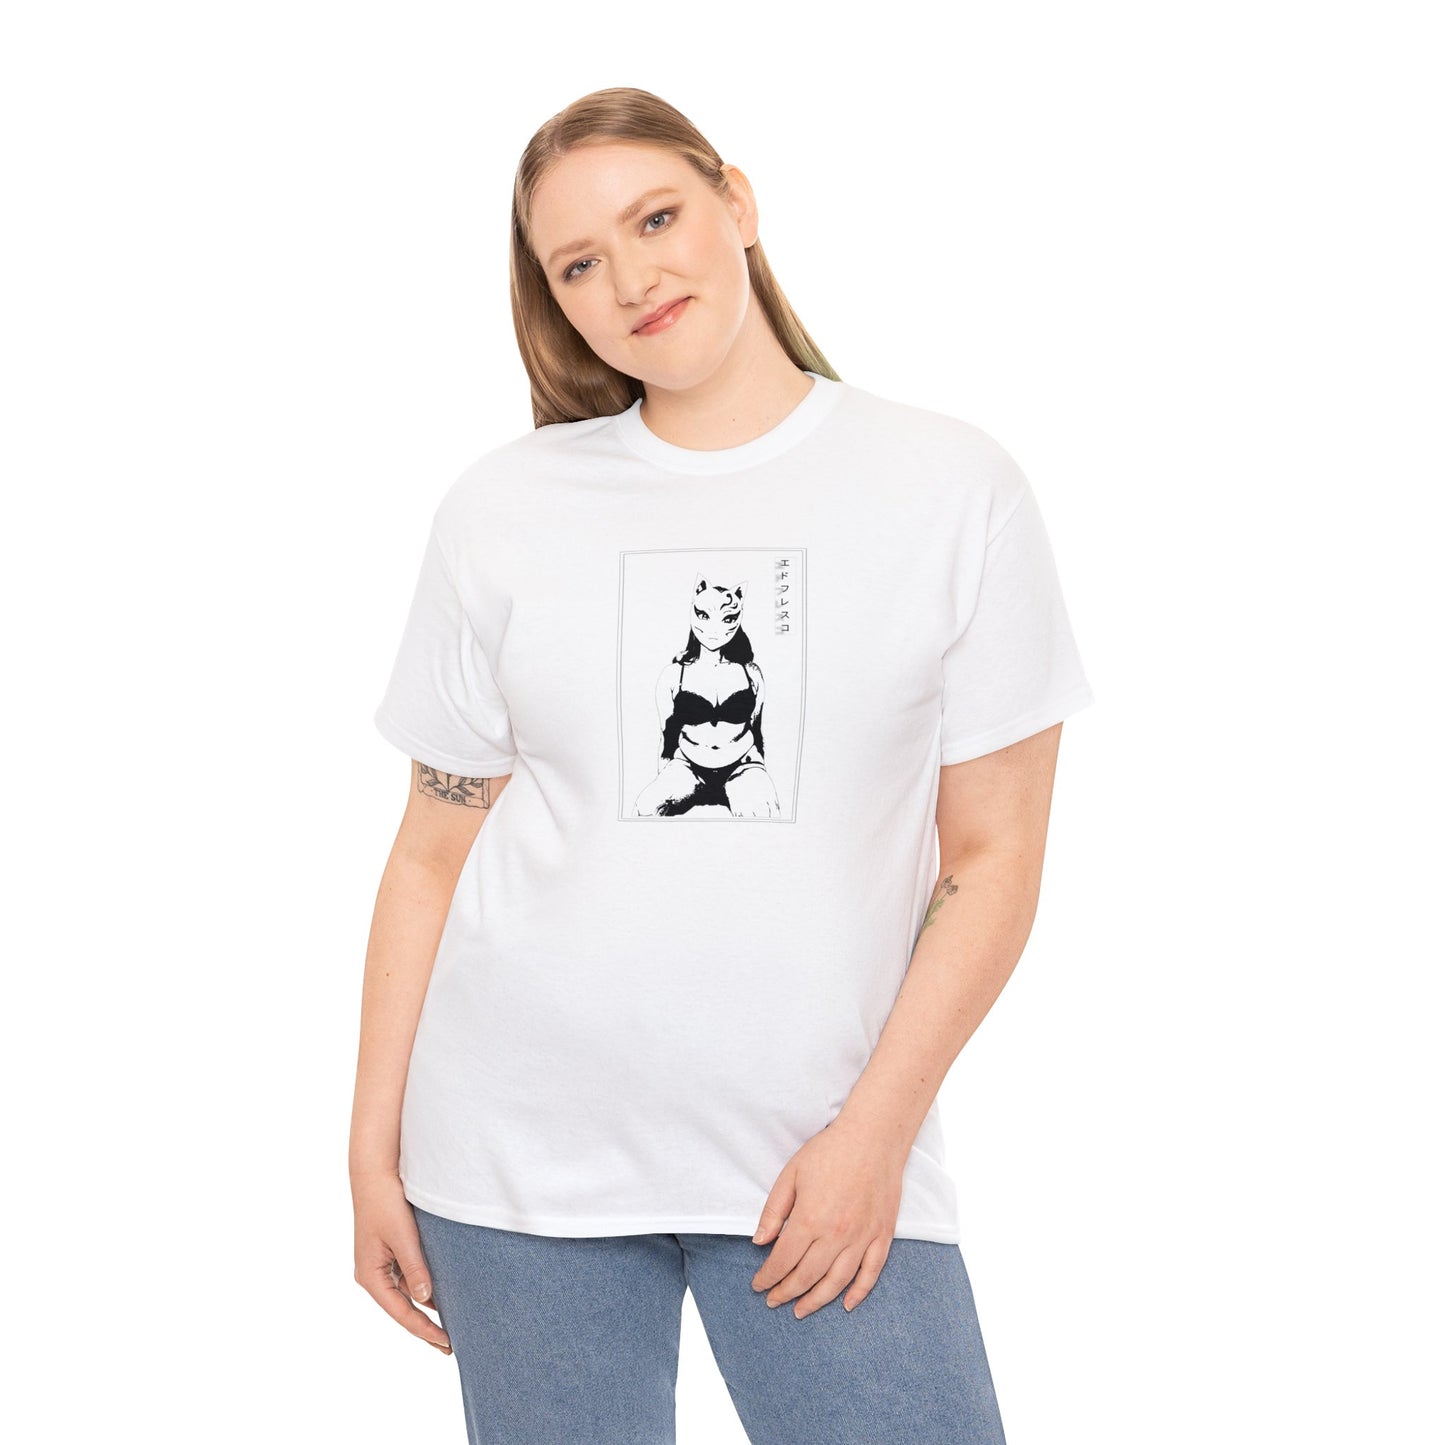 Anime Style Art Unisex Heavy Cotton Tee- "You Can't Post This"